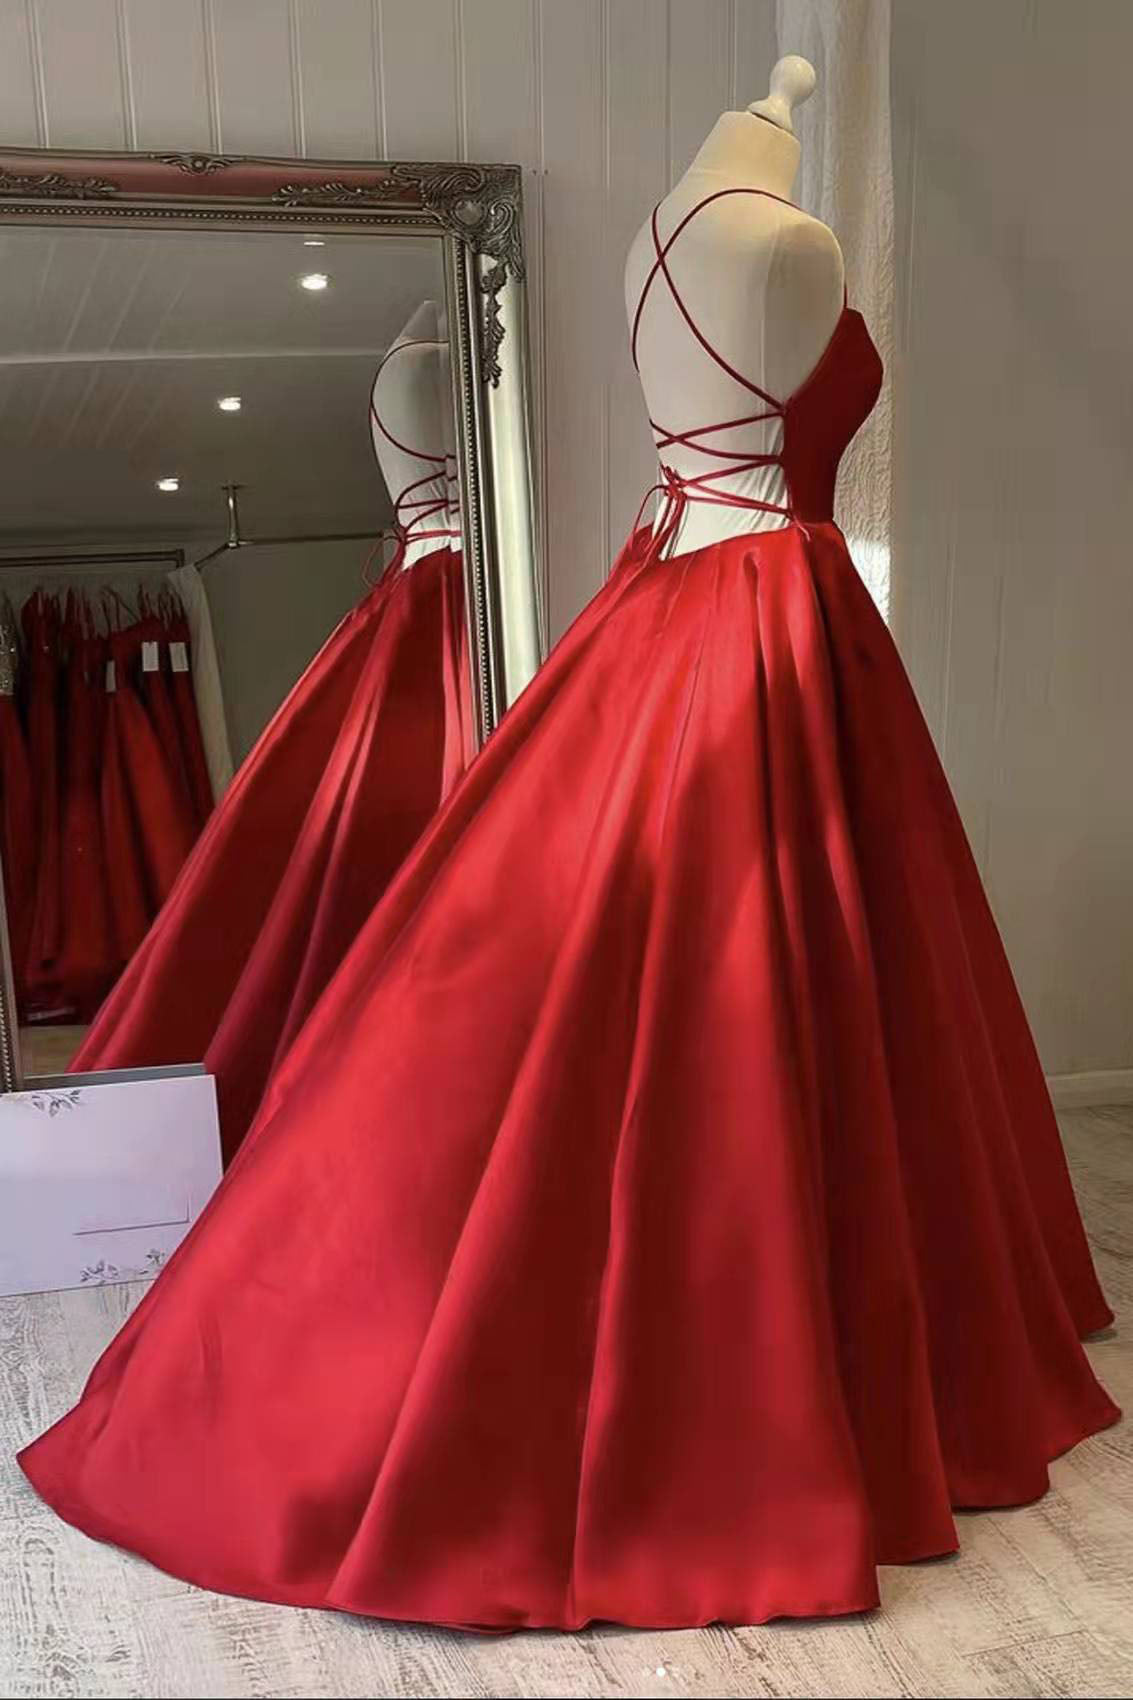 Prom Dresses For 21 Year Olds, Red Satin Spaghetti Straps Long Prom Dress, Puffy Princess Formal Gown